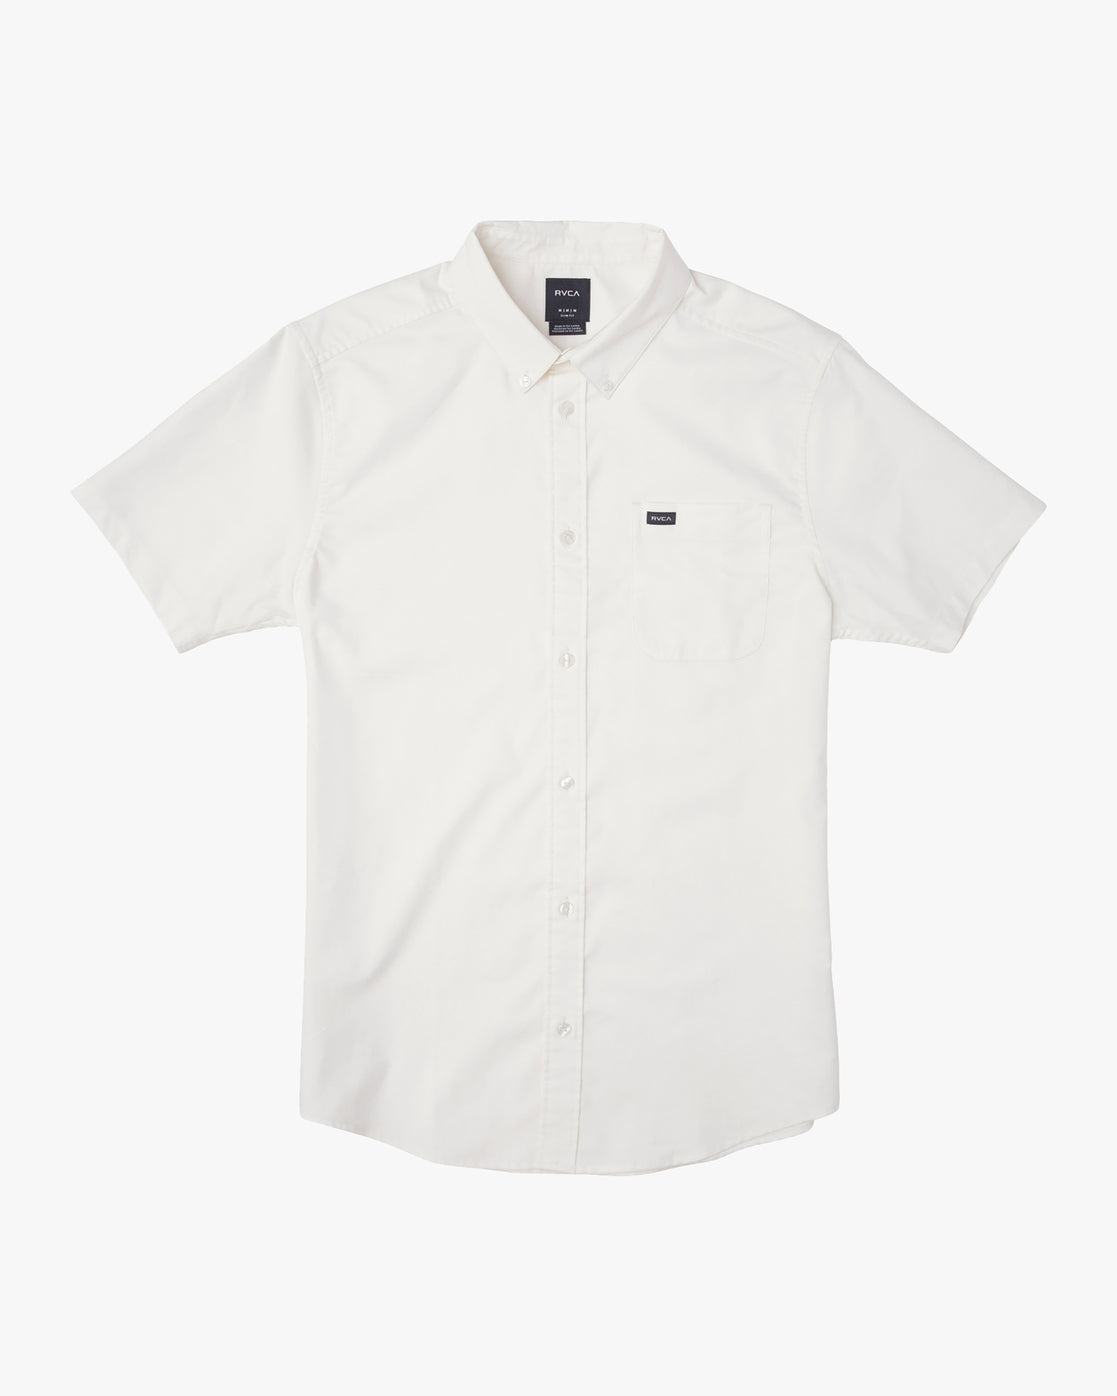 RVCA - That'll Do Stretch Short Sleeve Button Up